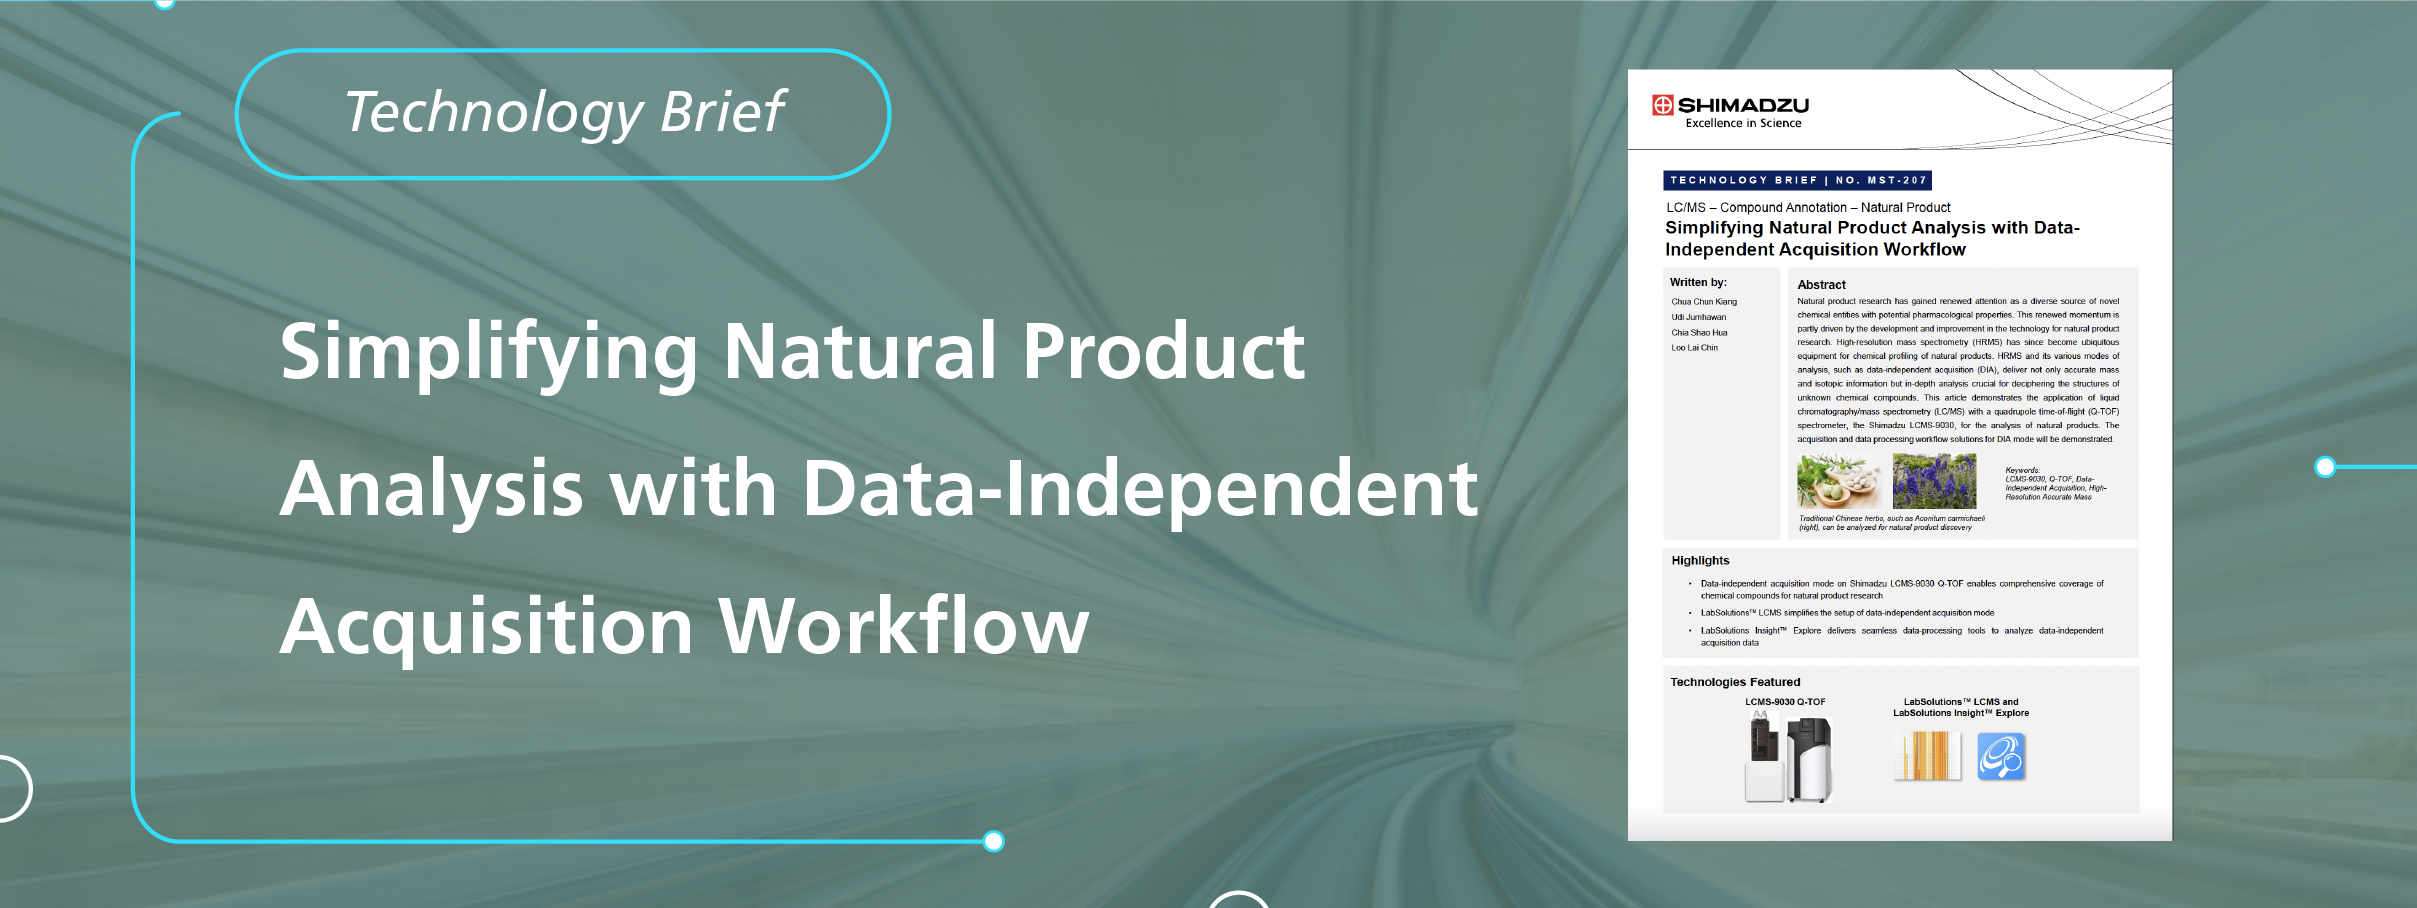 Simplifying Natural Product Analysis with Data-Independence Acquisition Workflow